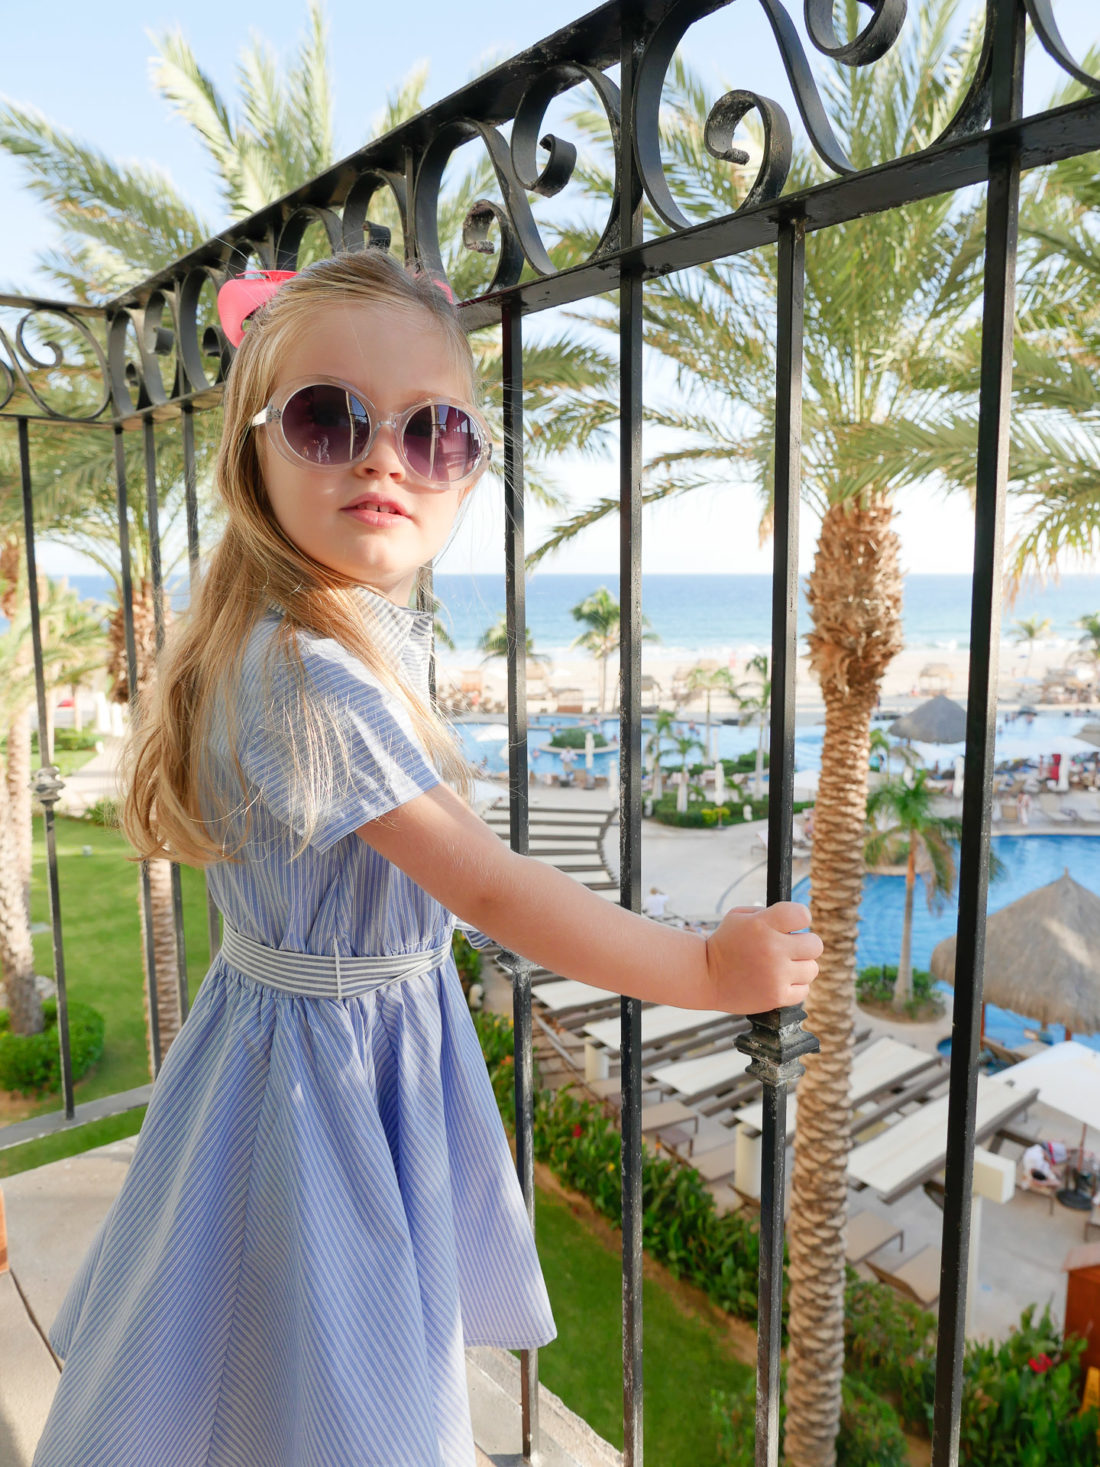 Marlowe Martino stands on the balcony wearing a blue and white dress and sunglasses at the Hyatt Ziva resort in Los Cabos Mexico